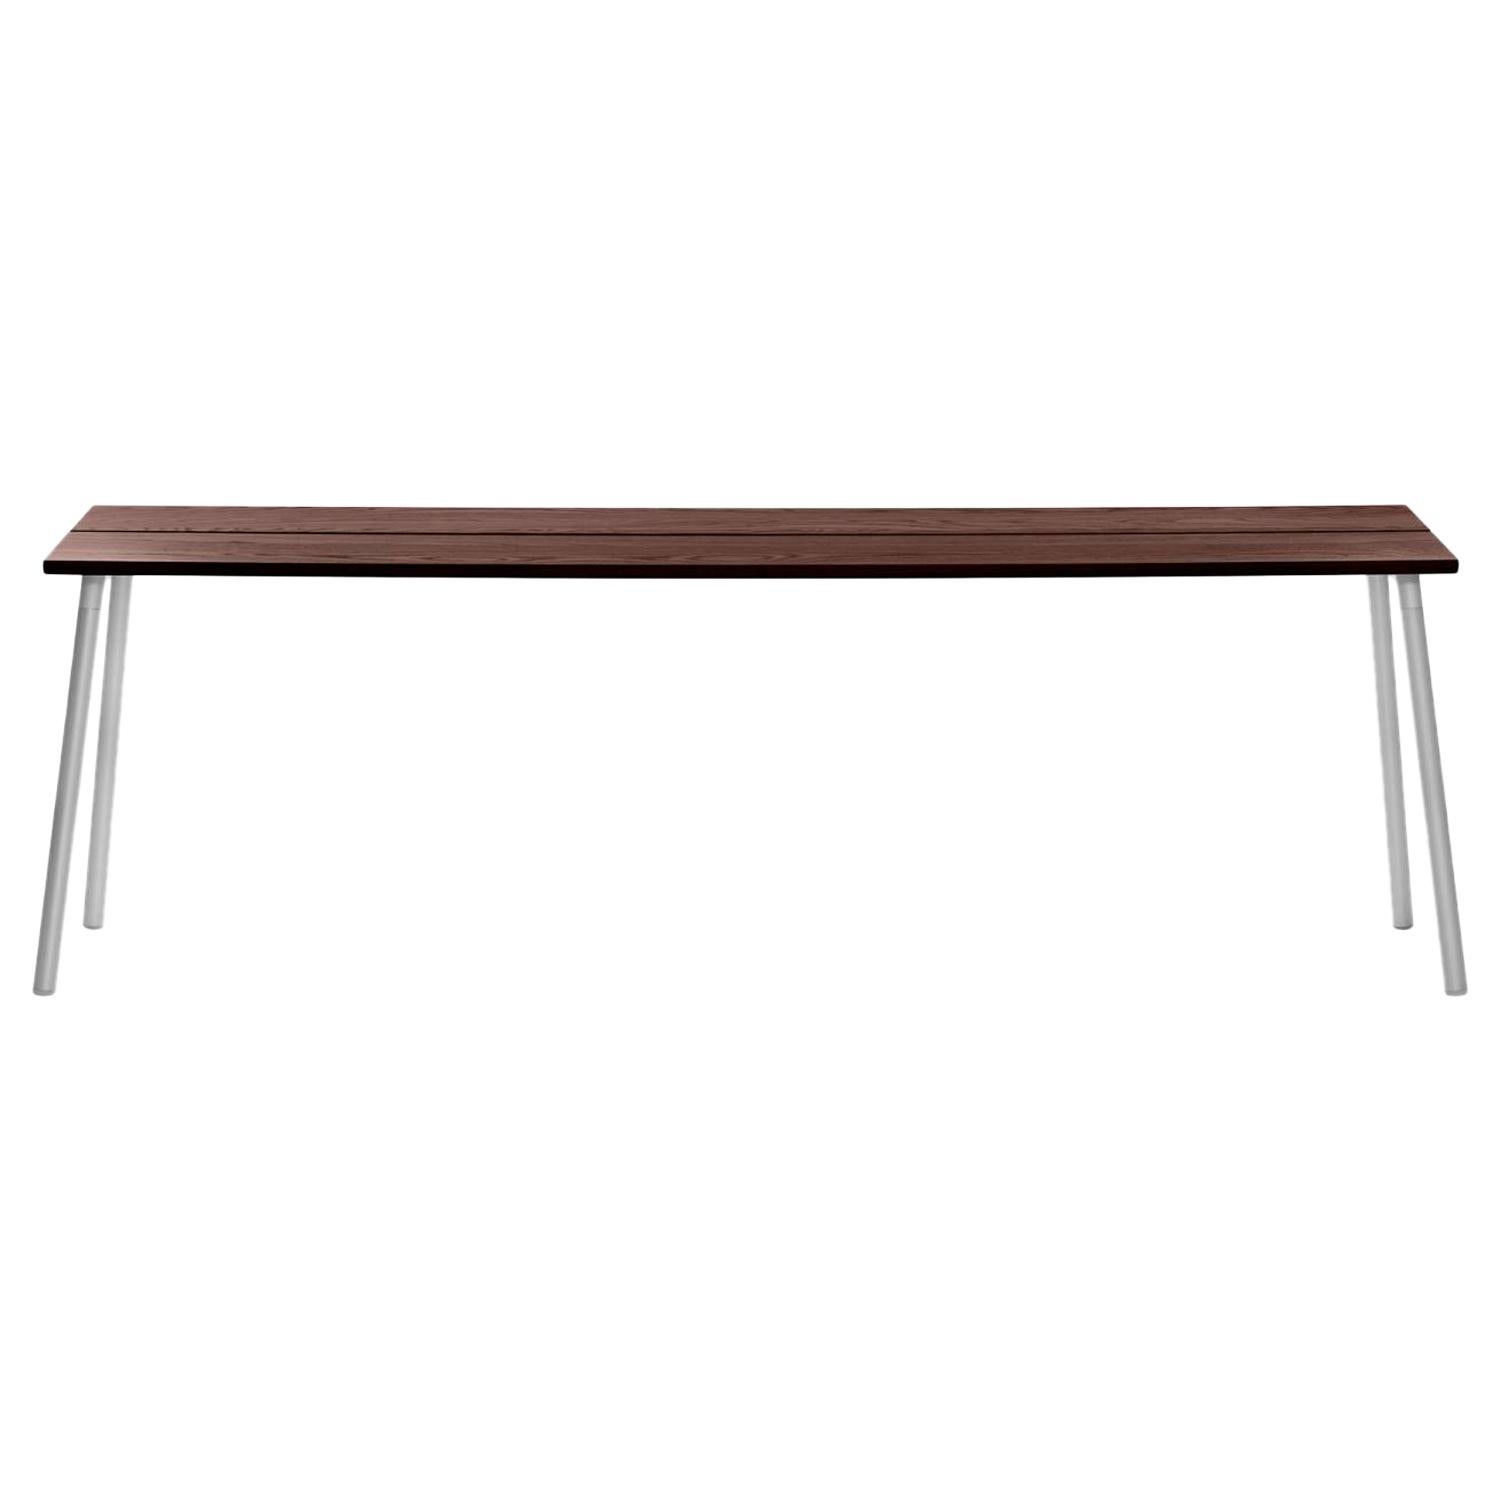 Emeco Run Large Side Table in Aluminum & Walnut by Sam Hecht + Kim Colin For Sale